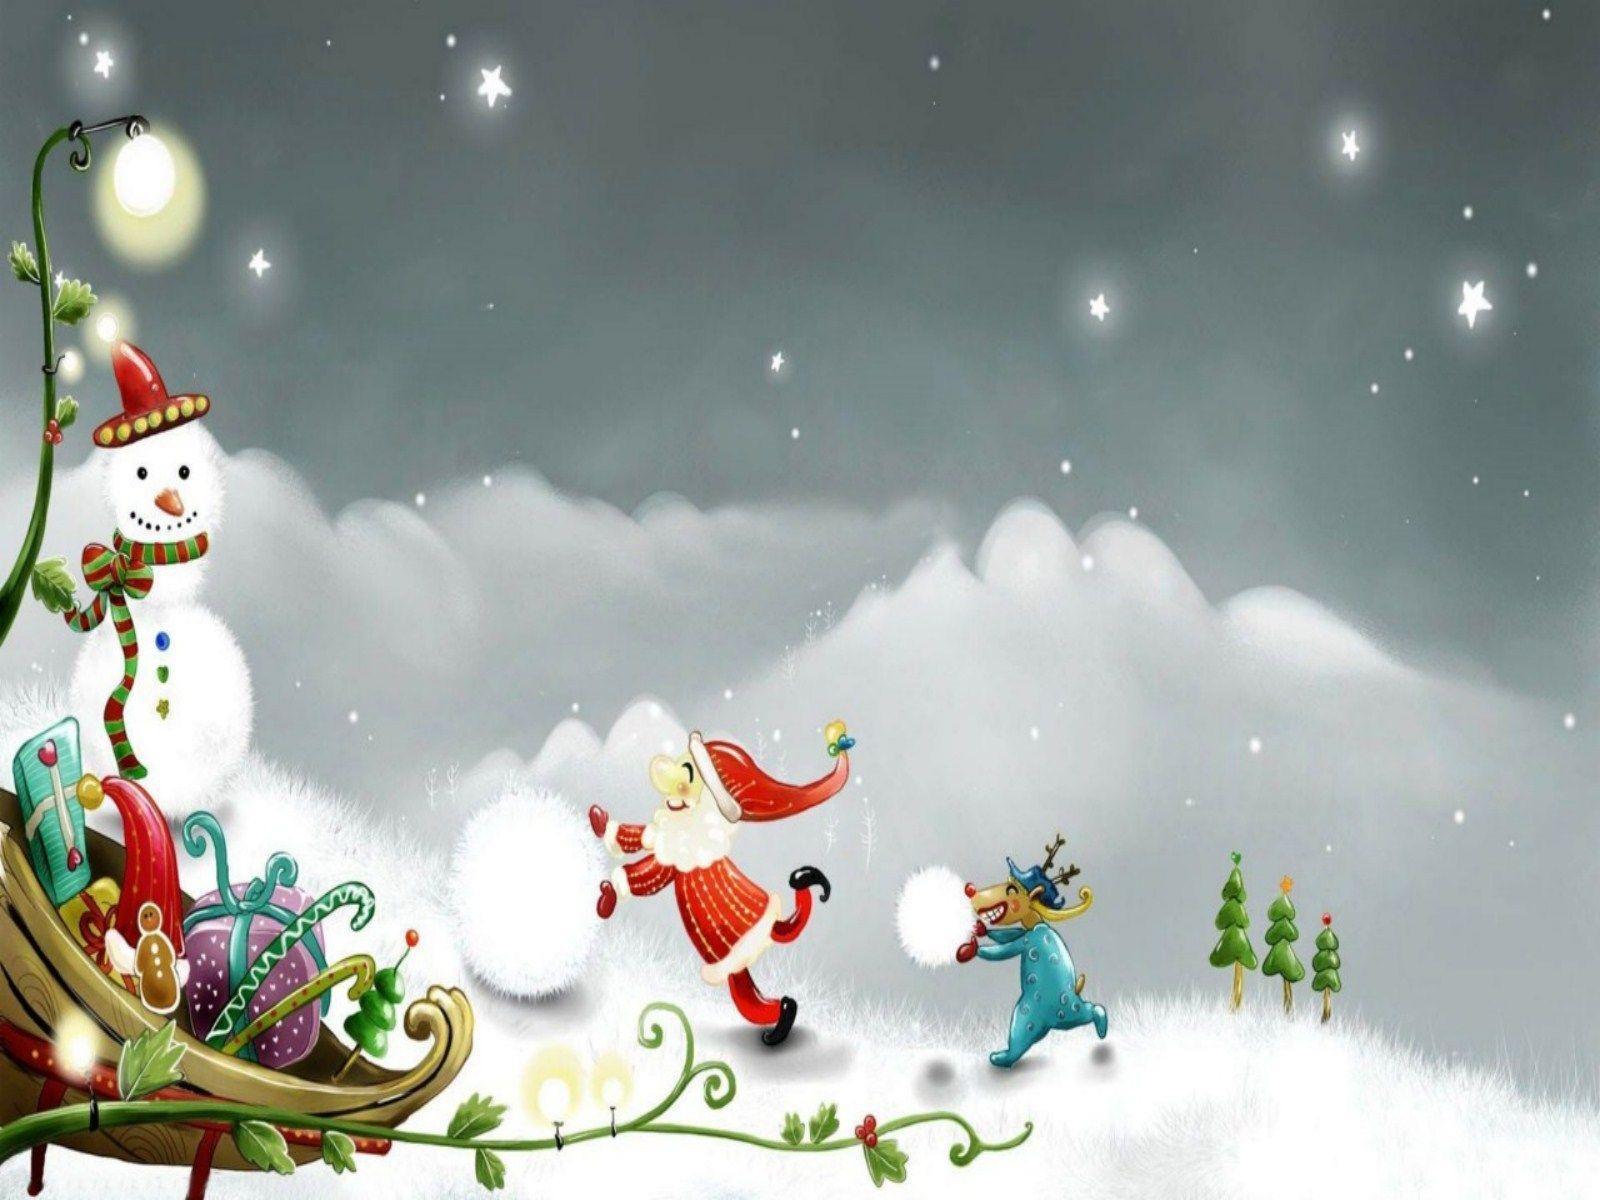 Marry Christmas Background - HD Wallpaper 